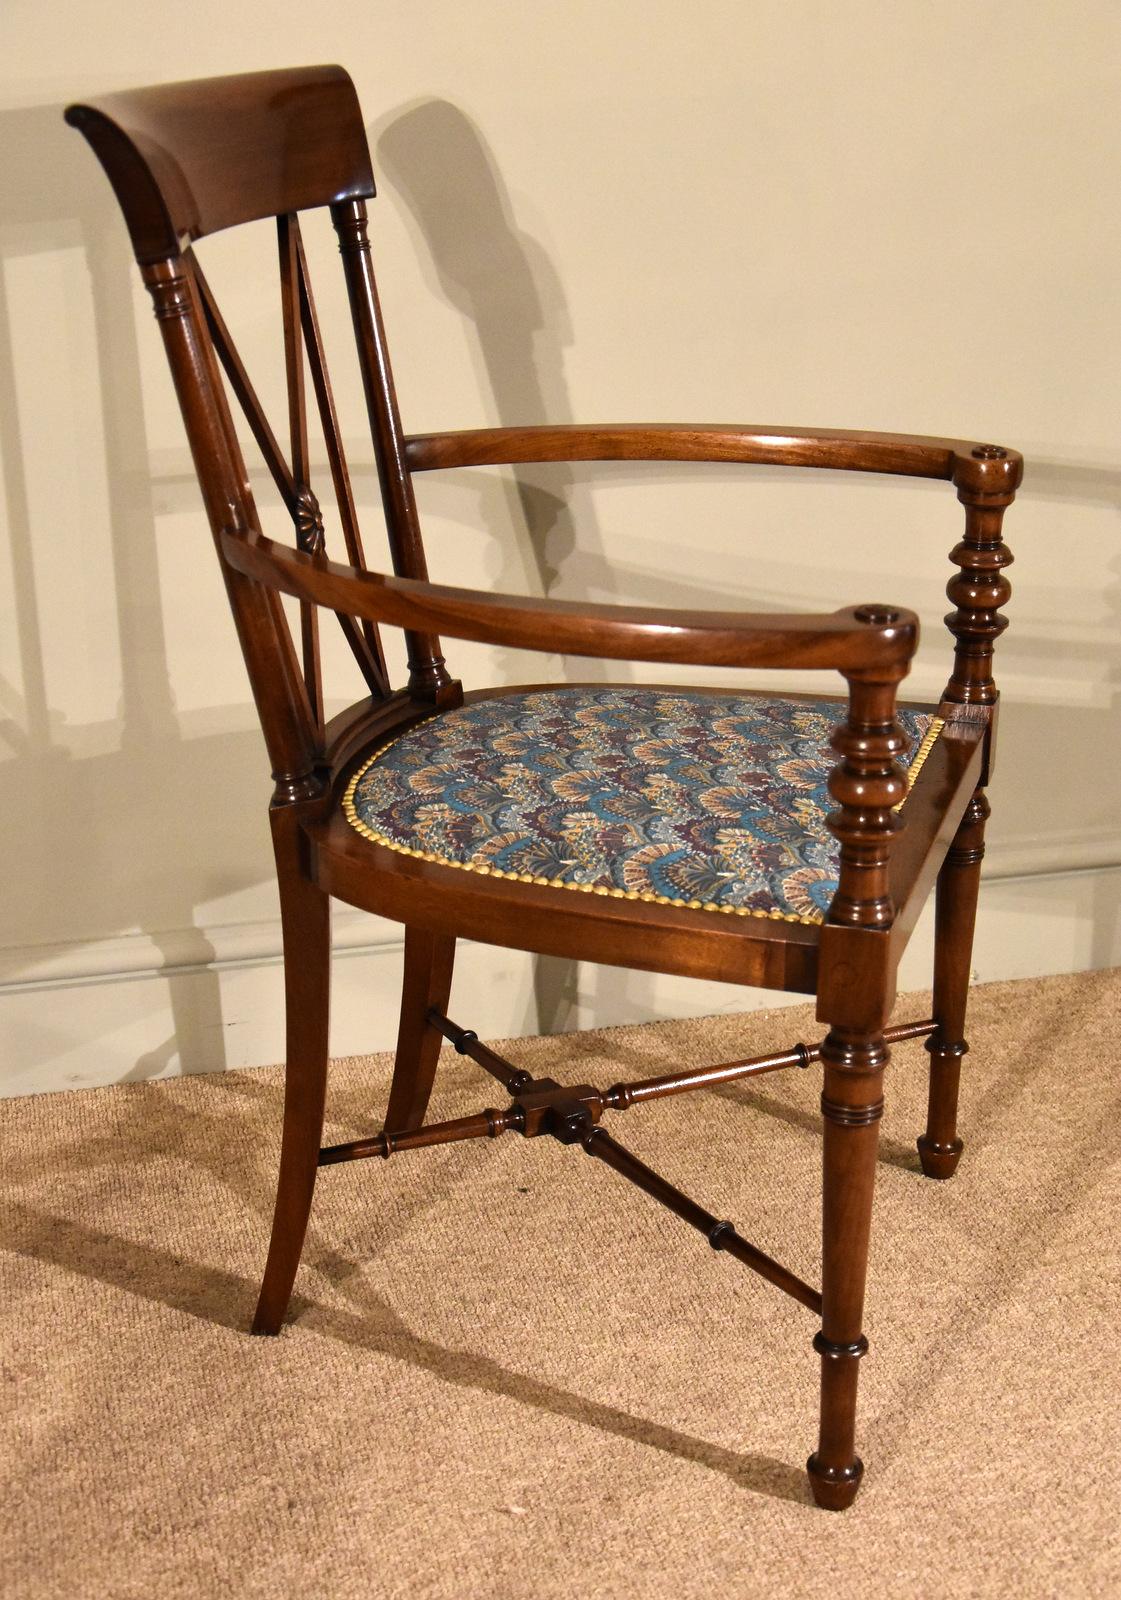 A fine quality turn of the century Liberty stamped armchair covered in Liberty fabric

Dimensions 
Height 34